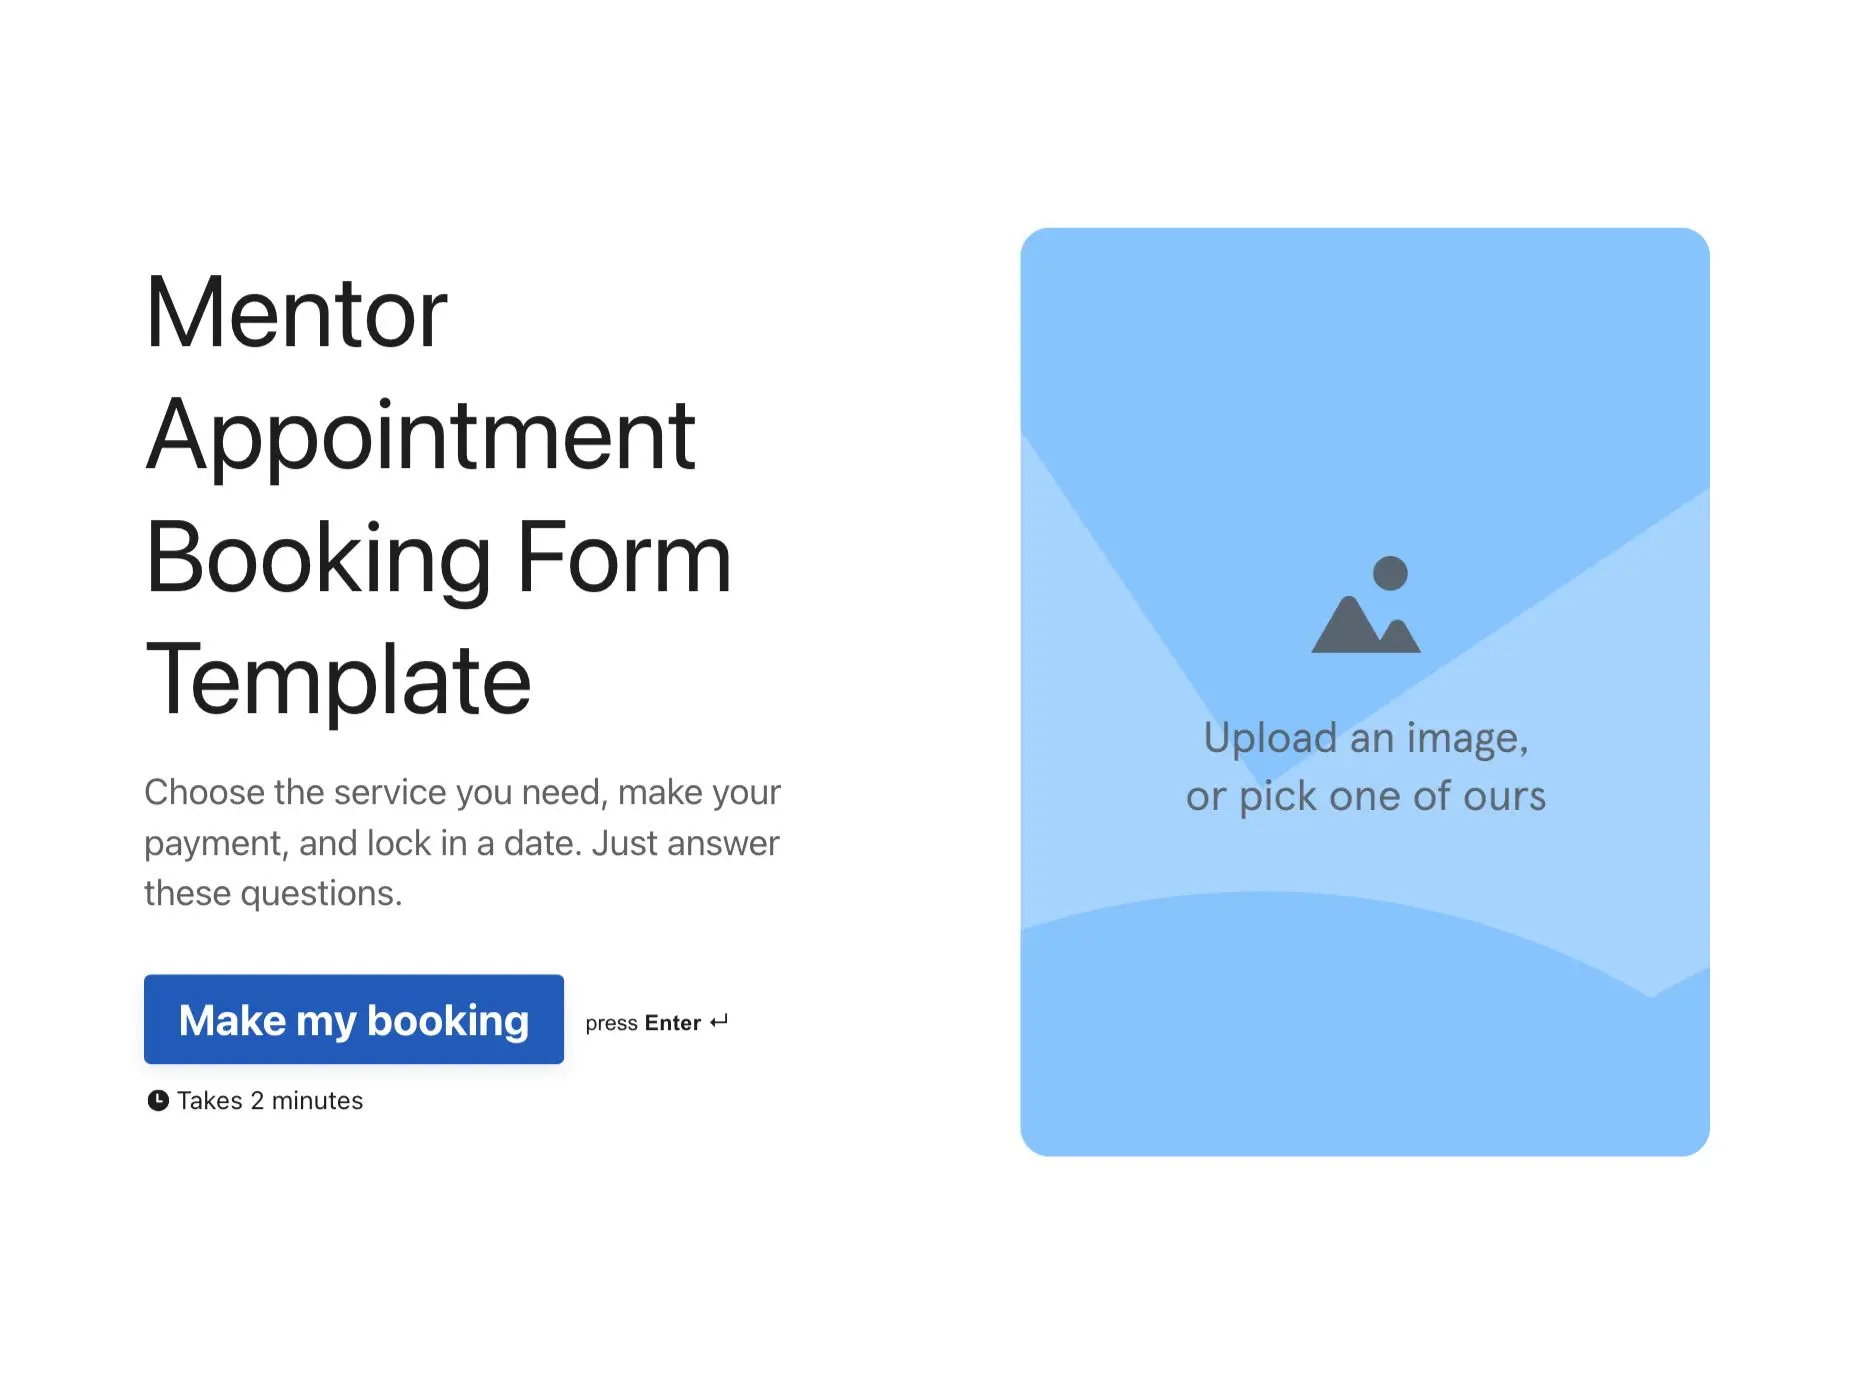 Mentor Appointment Booking Form Template Hero